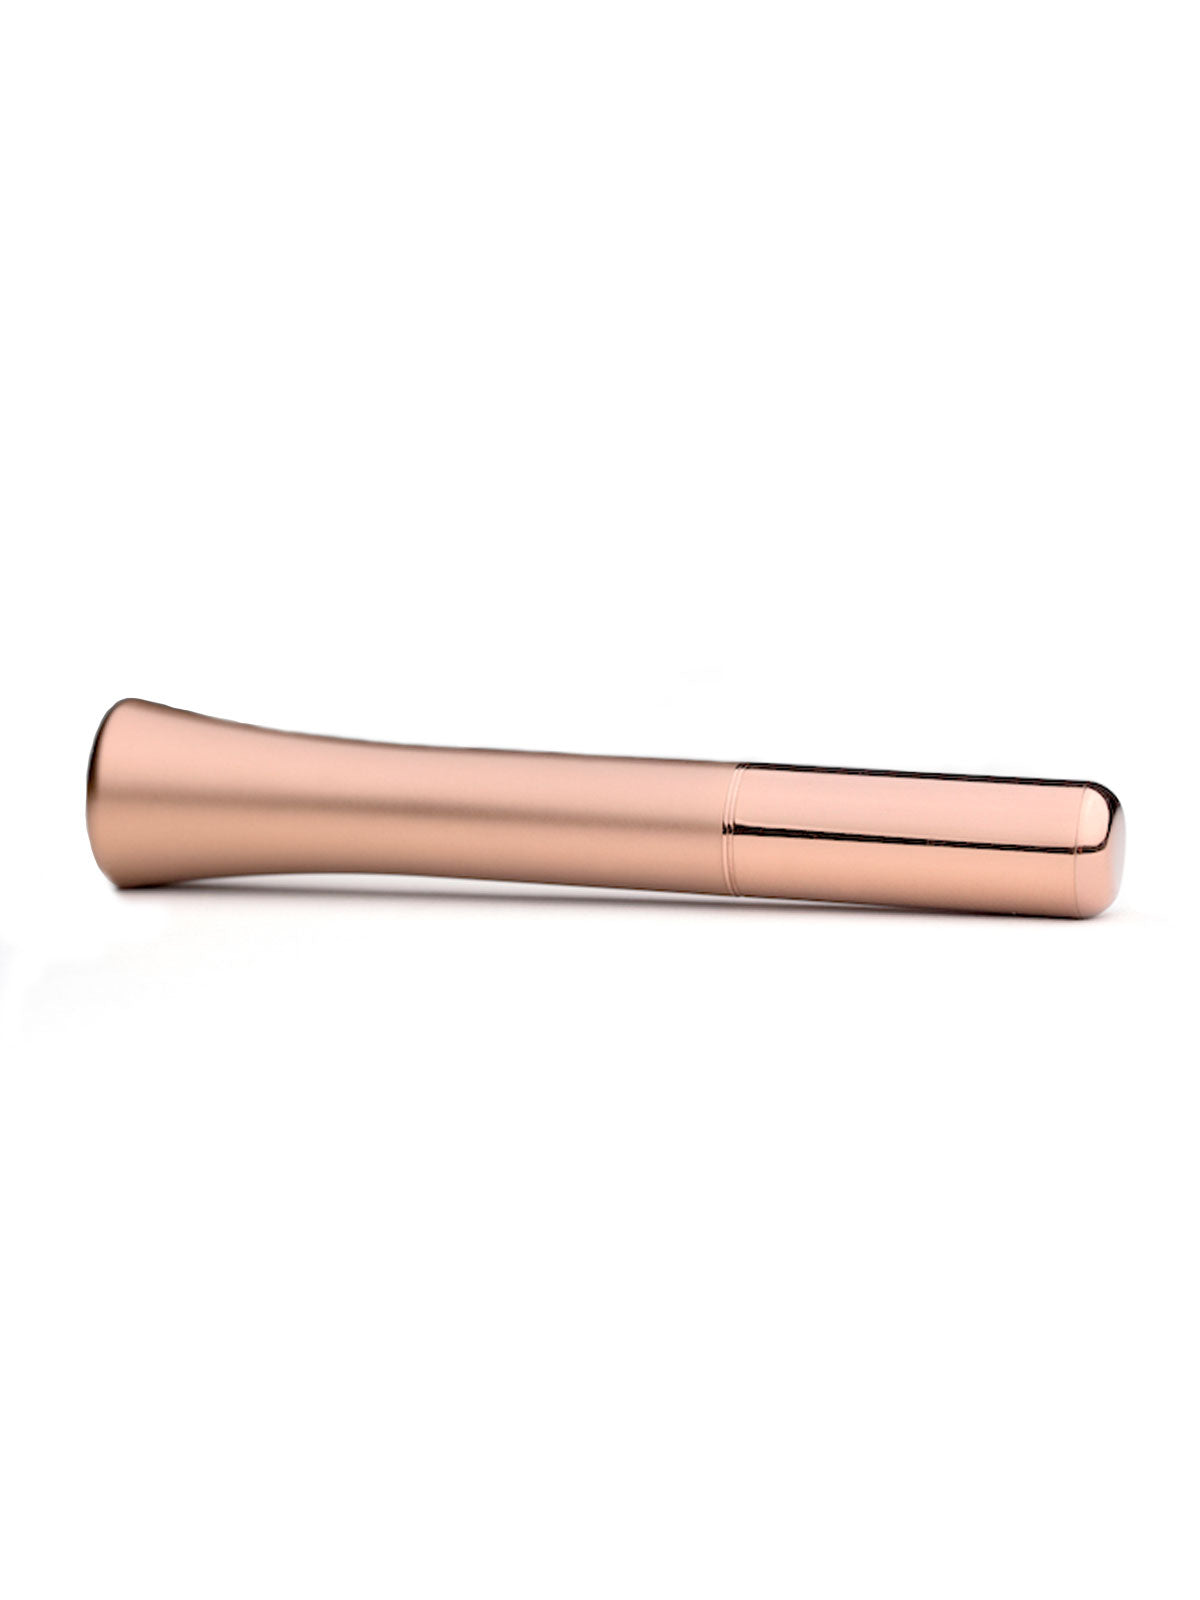 Rose gold Wink+ clitoral vibrator by Crave 